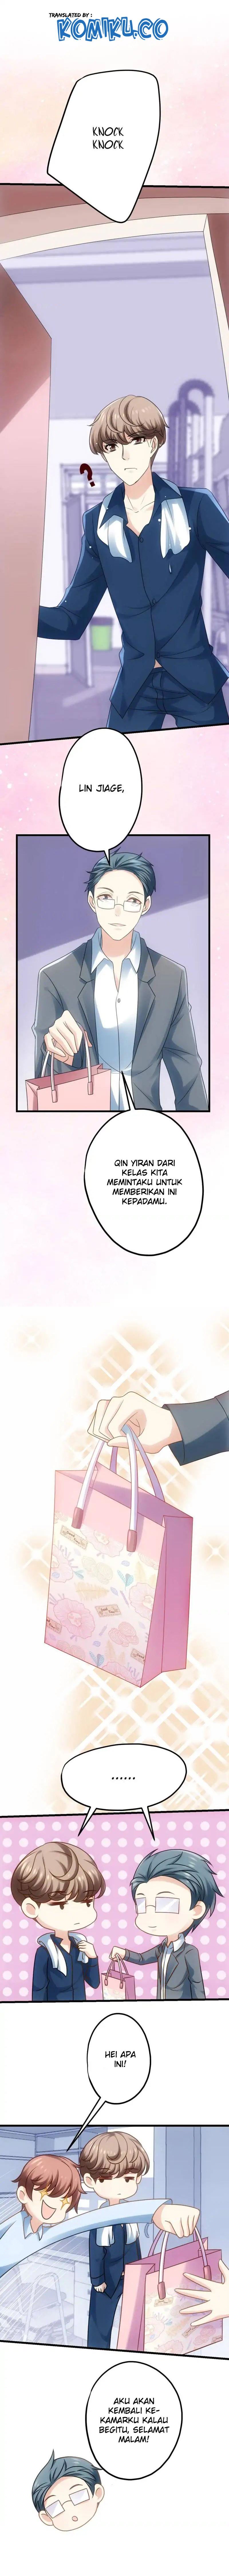 My Beautiful Time With You Chapter 06